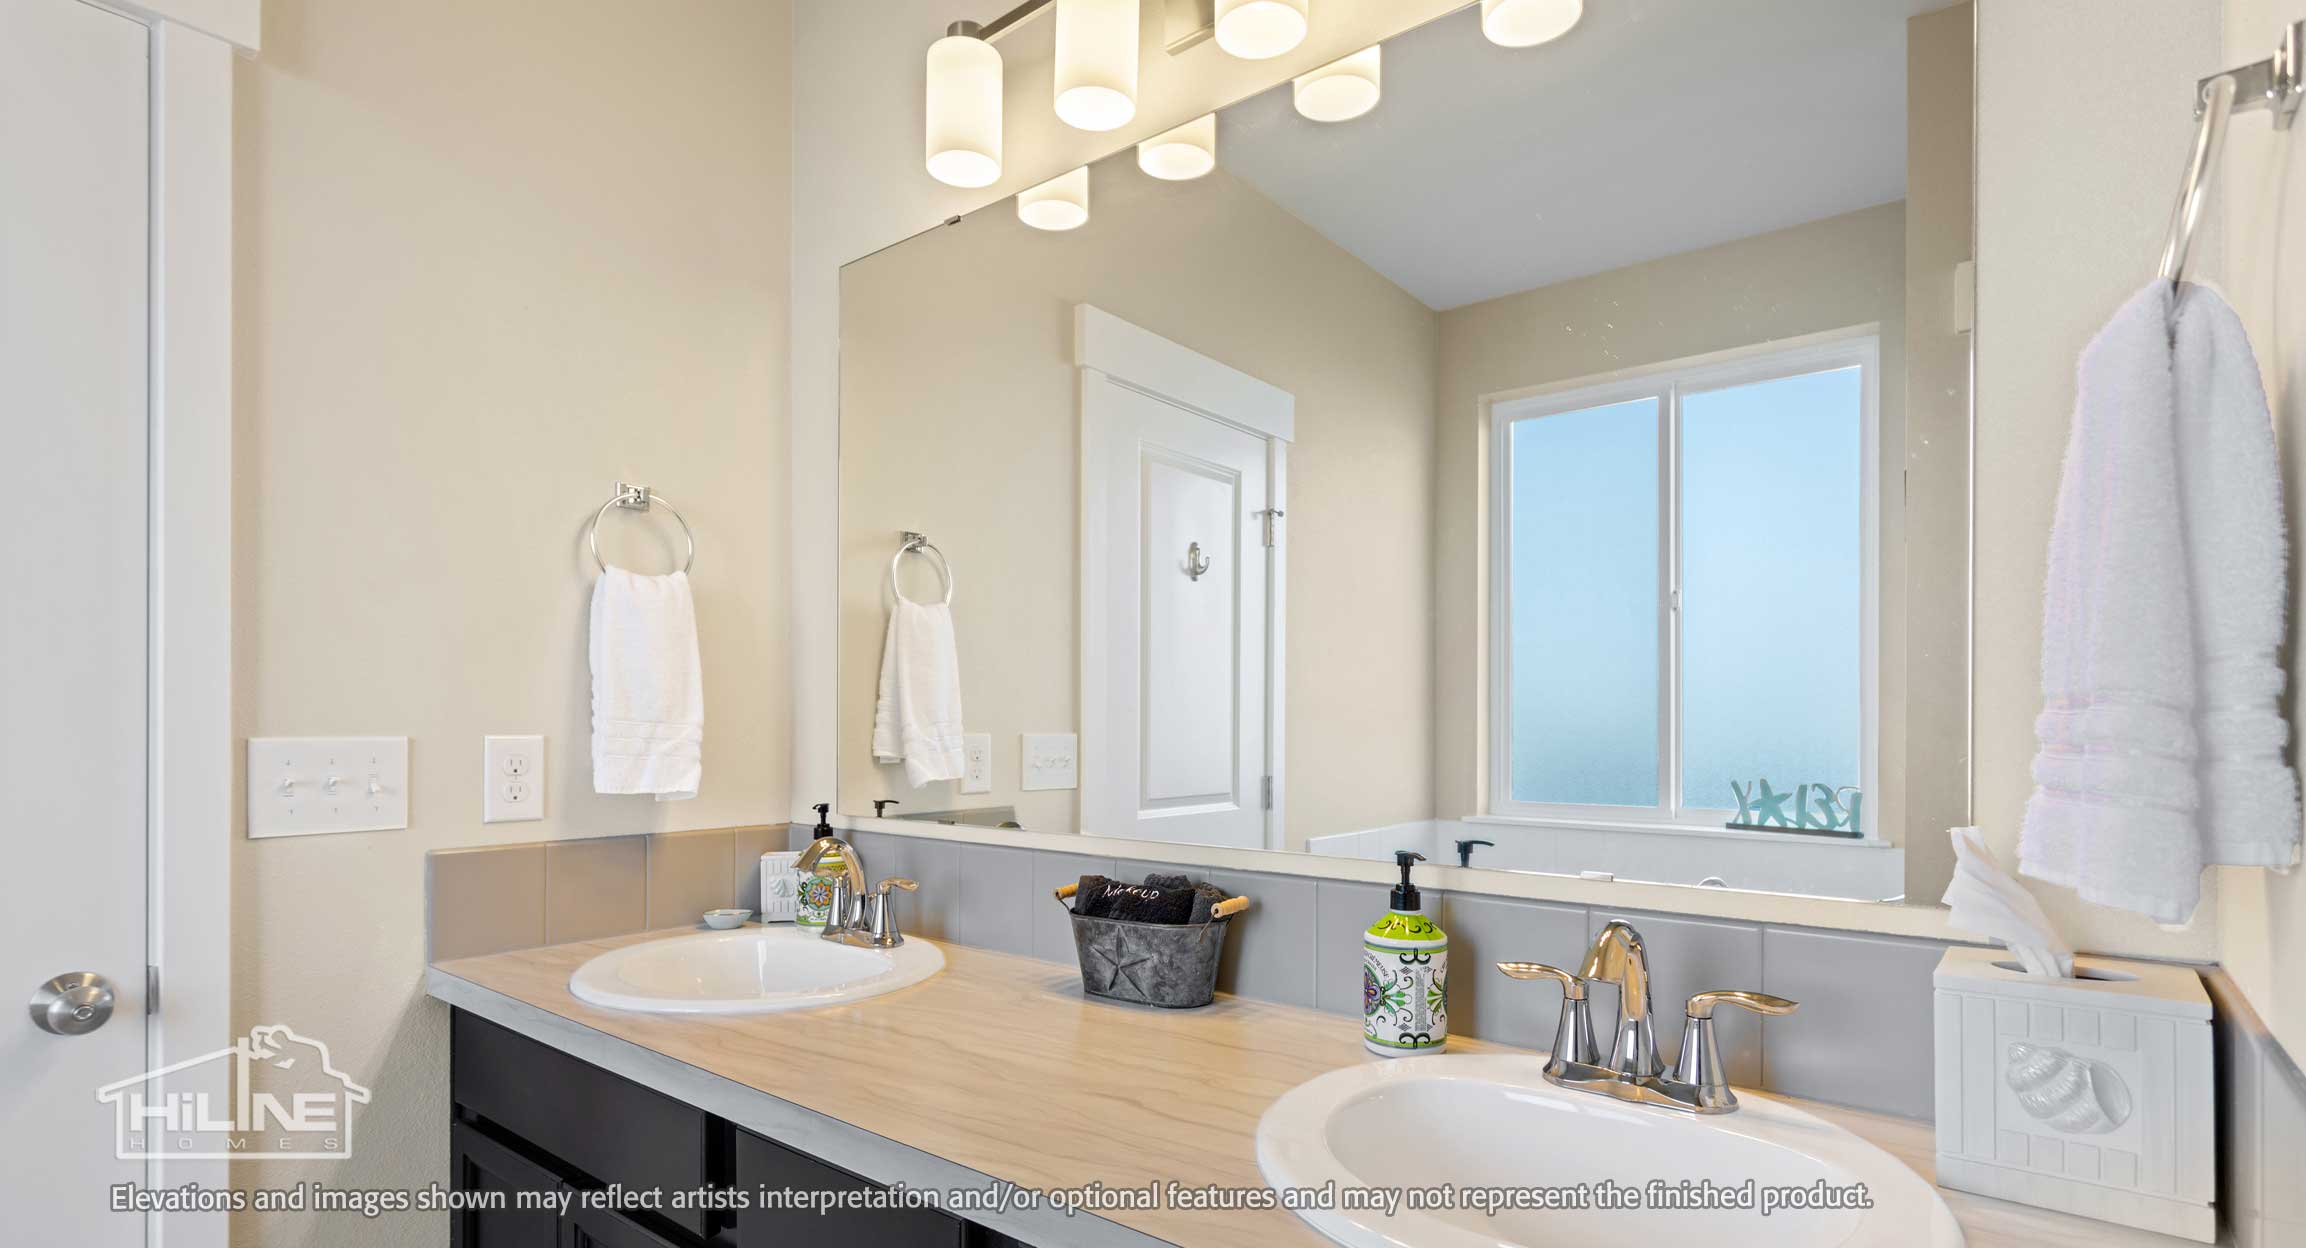 Image of Home Plan 3072 Primary Bath 2.